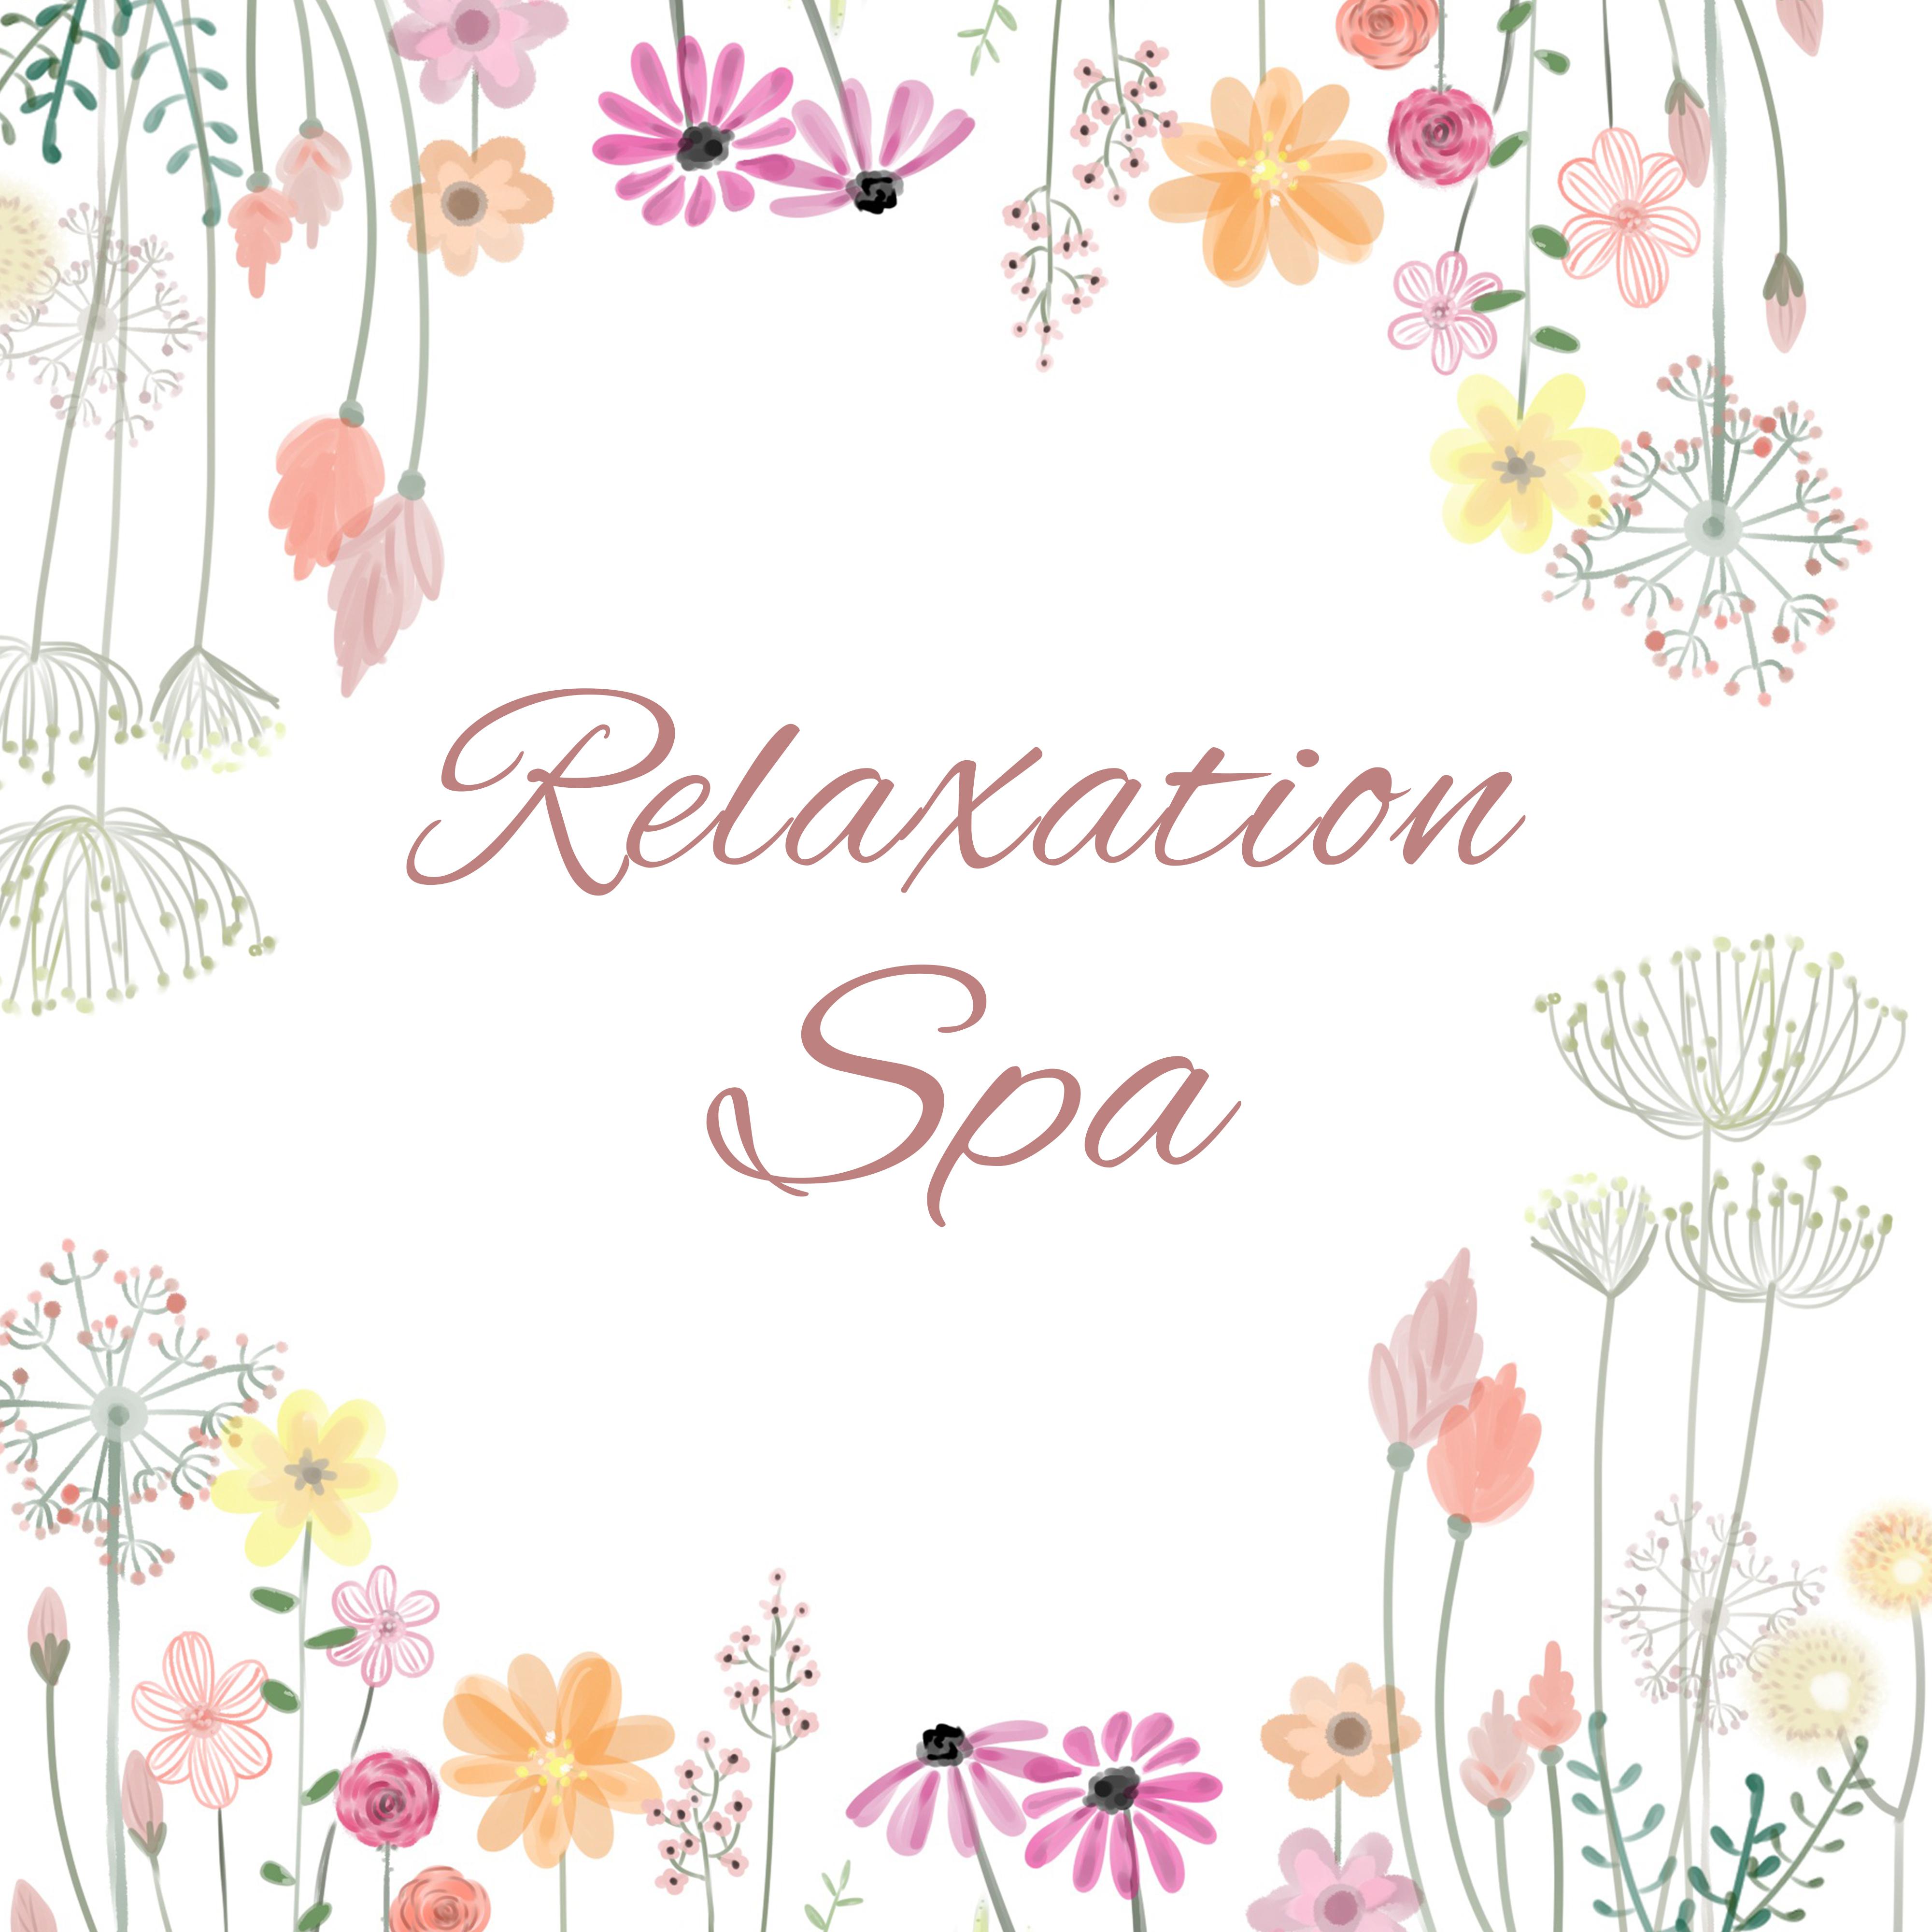 Relaxation Spa  Healing Nature, Peaceful Music for Wellness, Rest, Anti Stress Songs, Soft Nature Sounds for Healing, Pure Massage, Deep Sleep